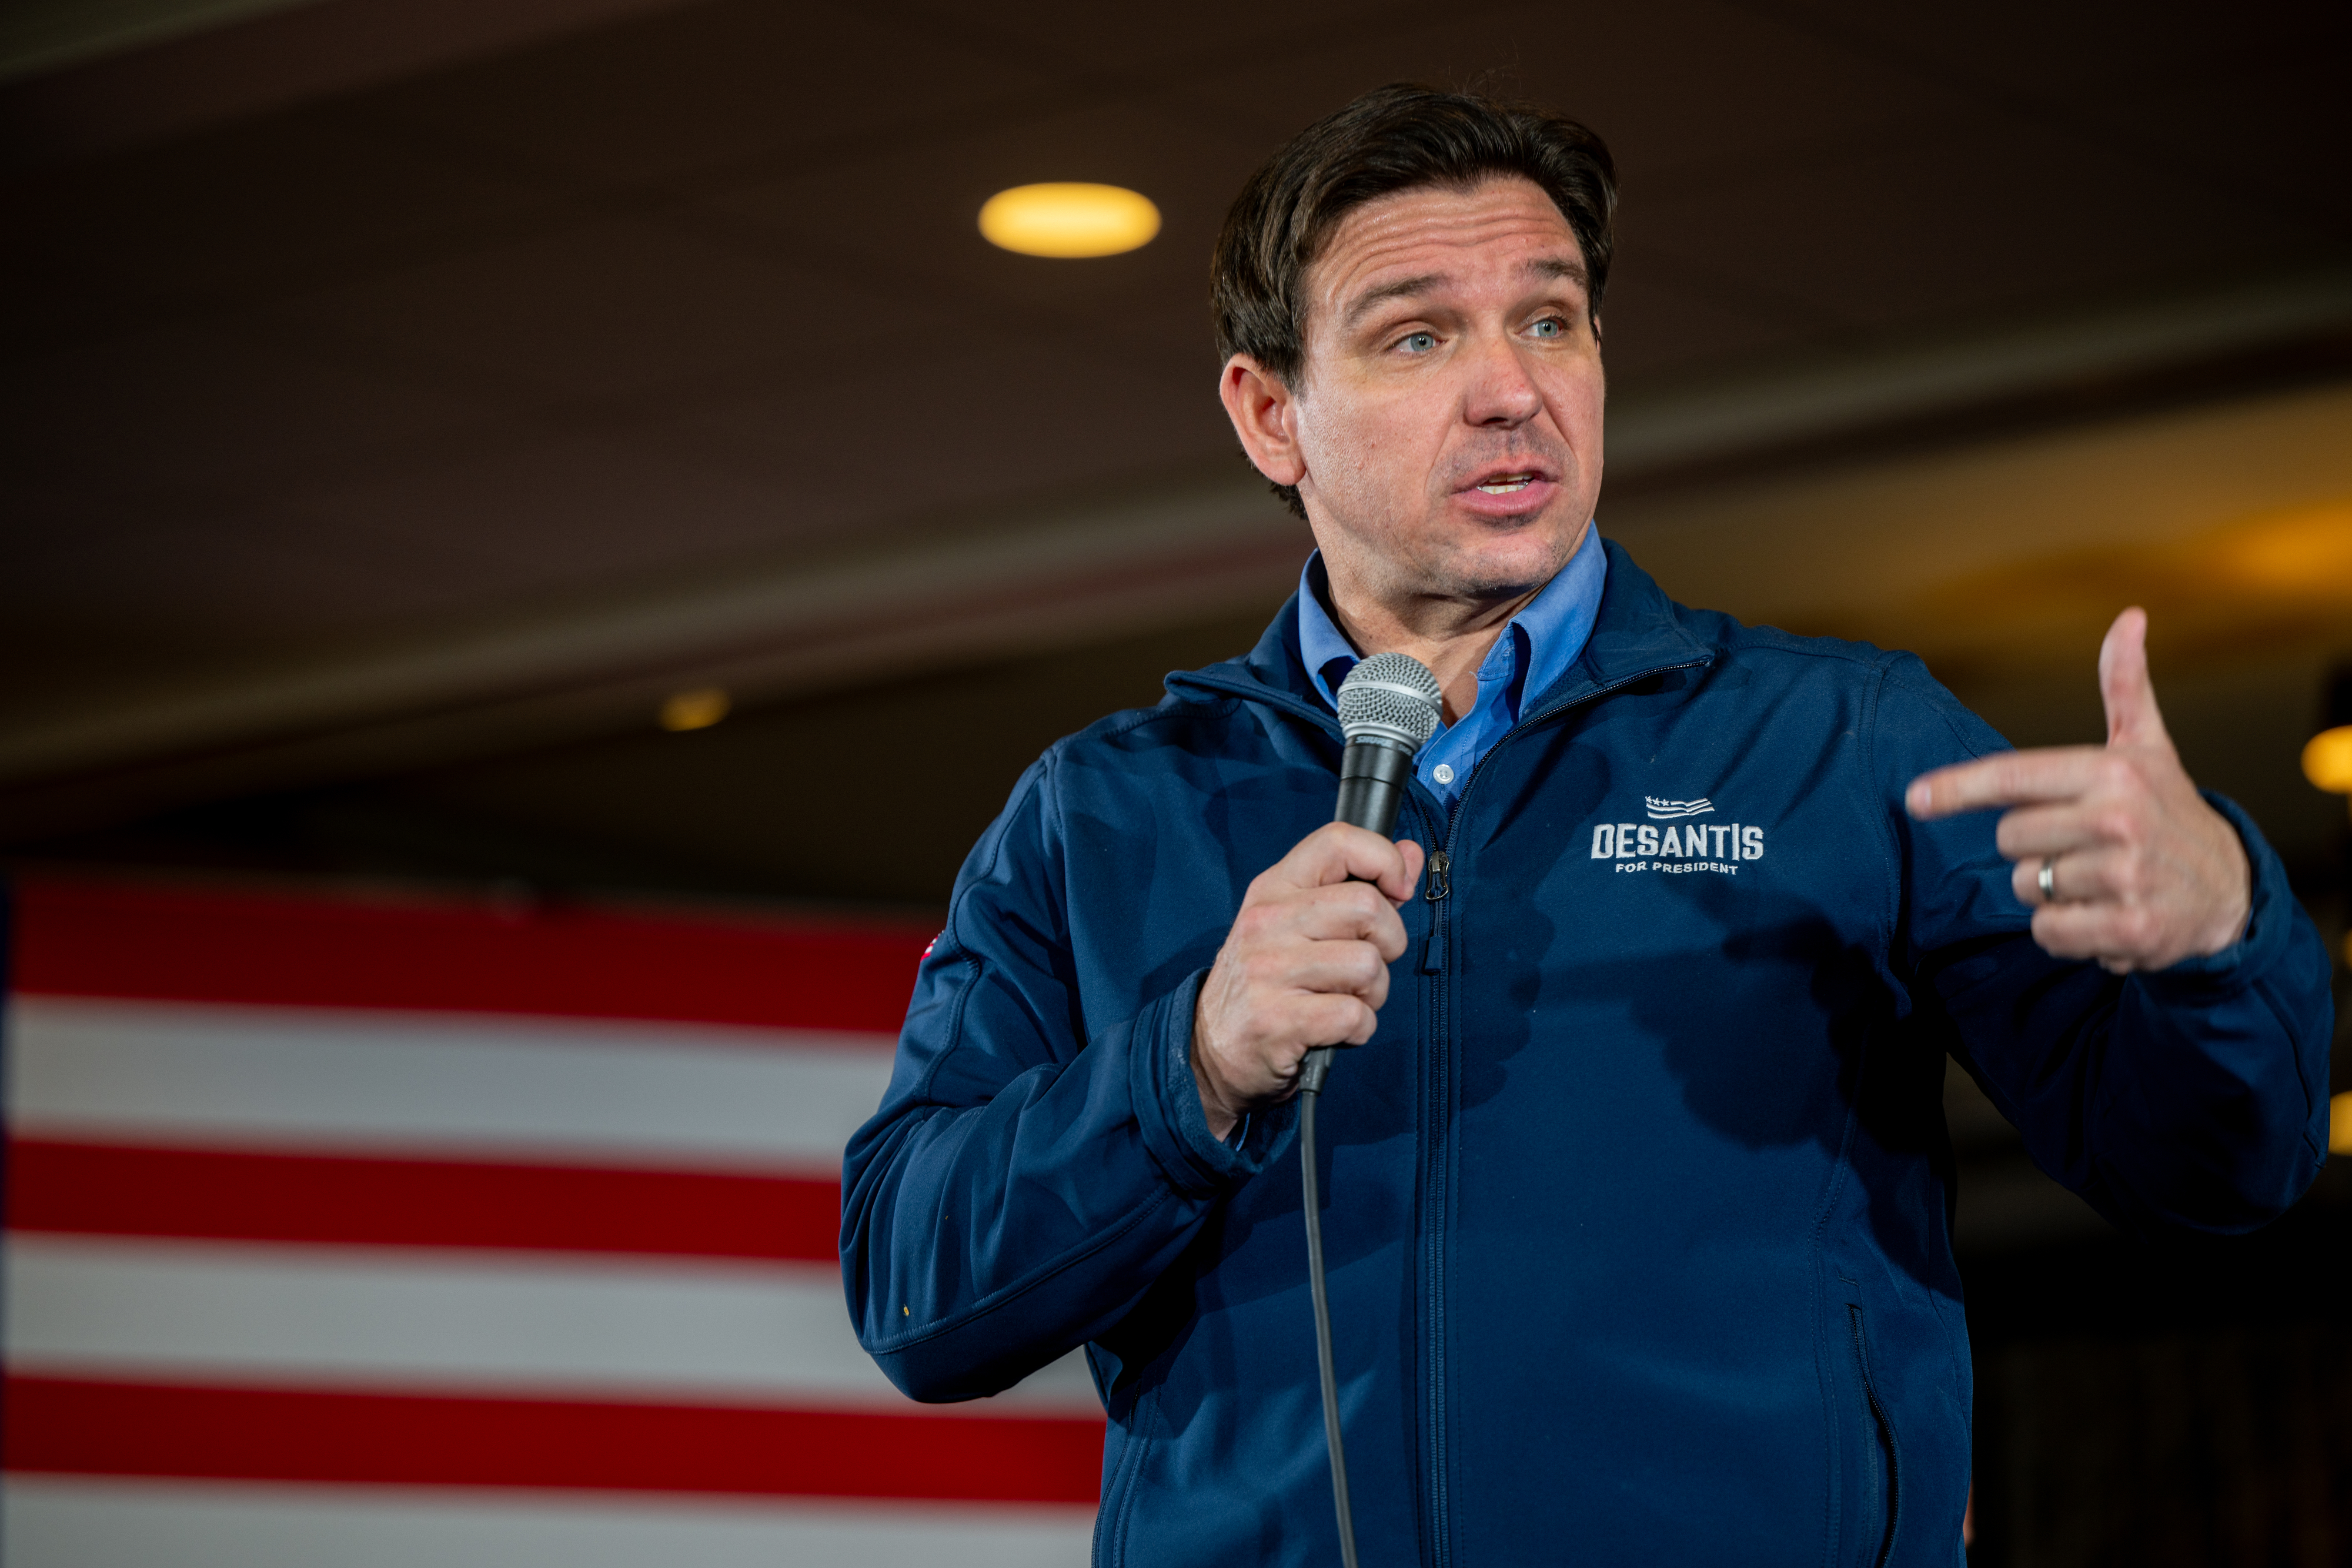 Ron DeSantis in a branded jacket holding a microphone, speaking in front of an American flag